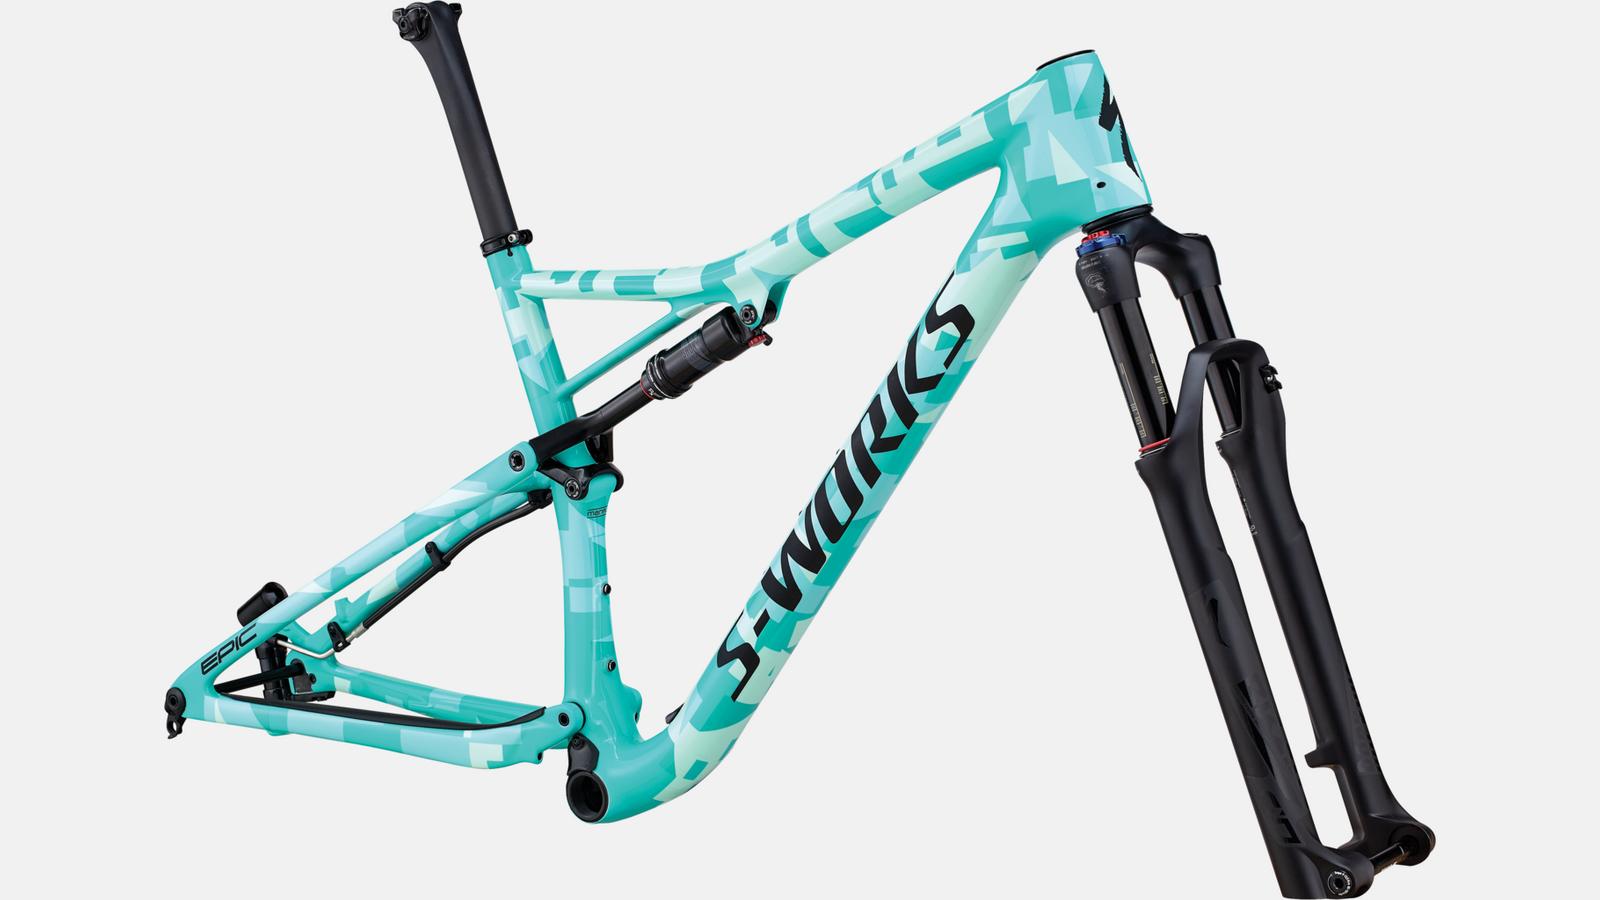 Paint for 2018 Specialized Men's S-Works Epic Frameset - Limited Edition - Gloss Acid Mint